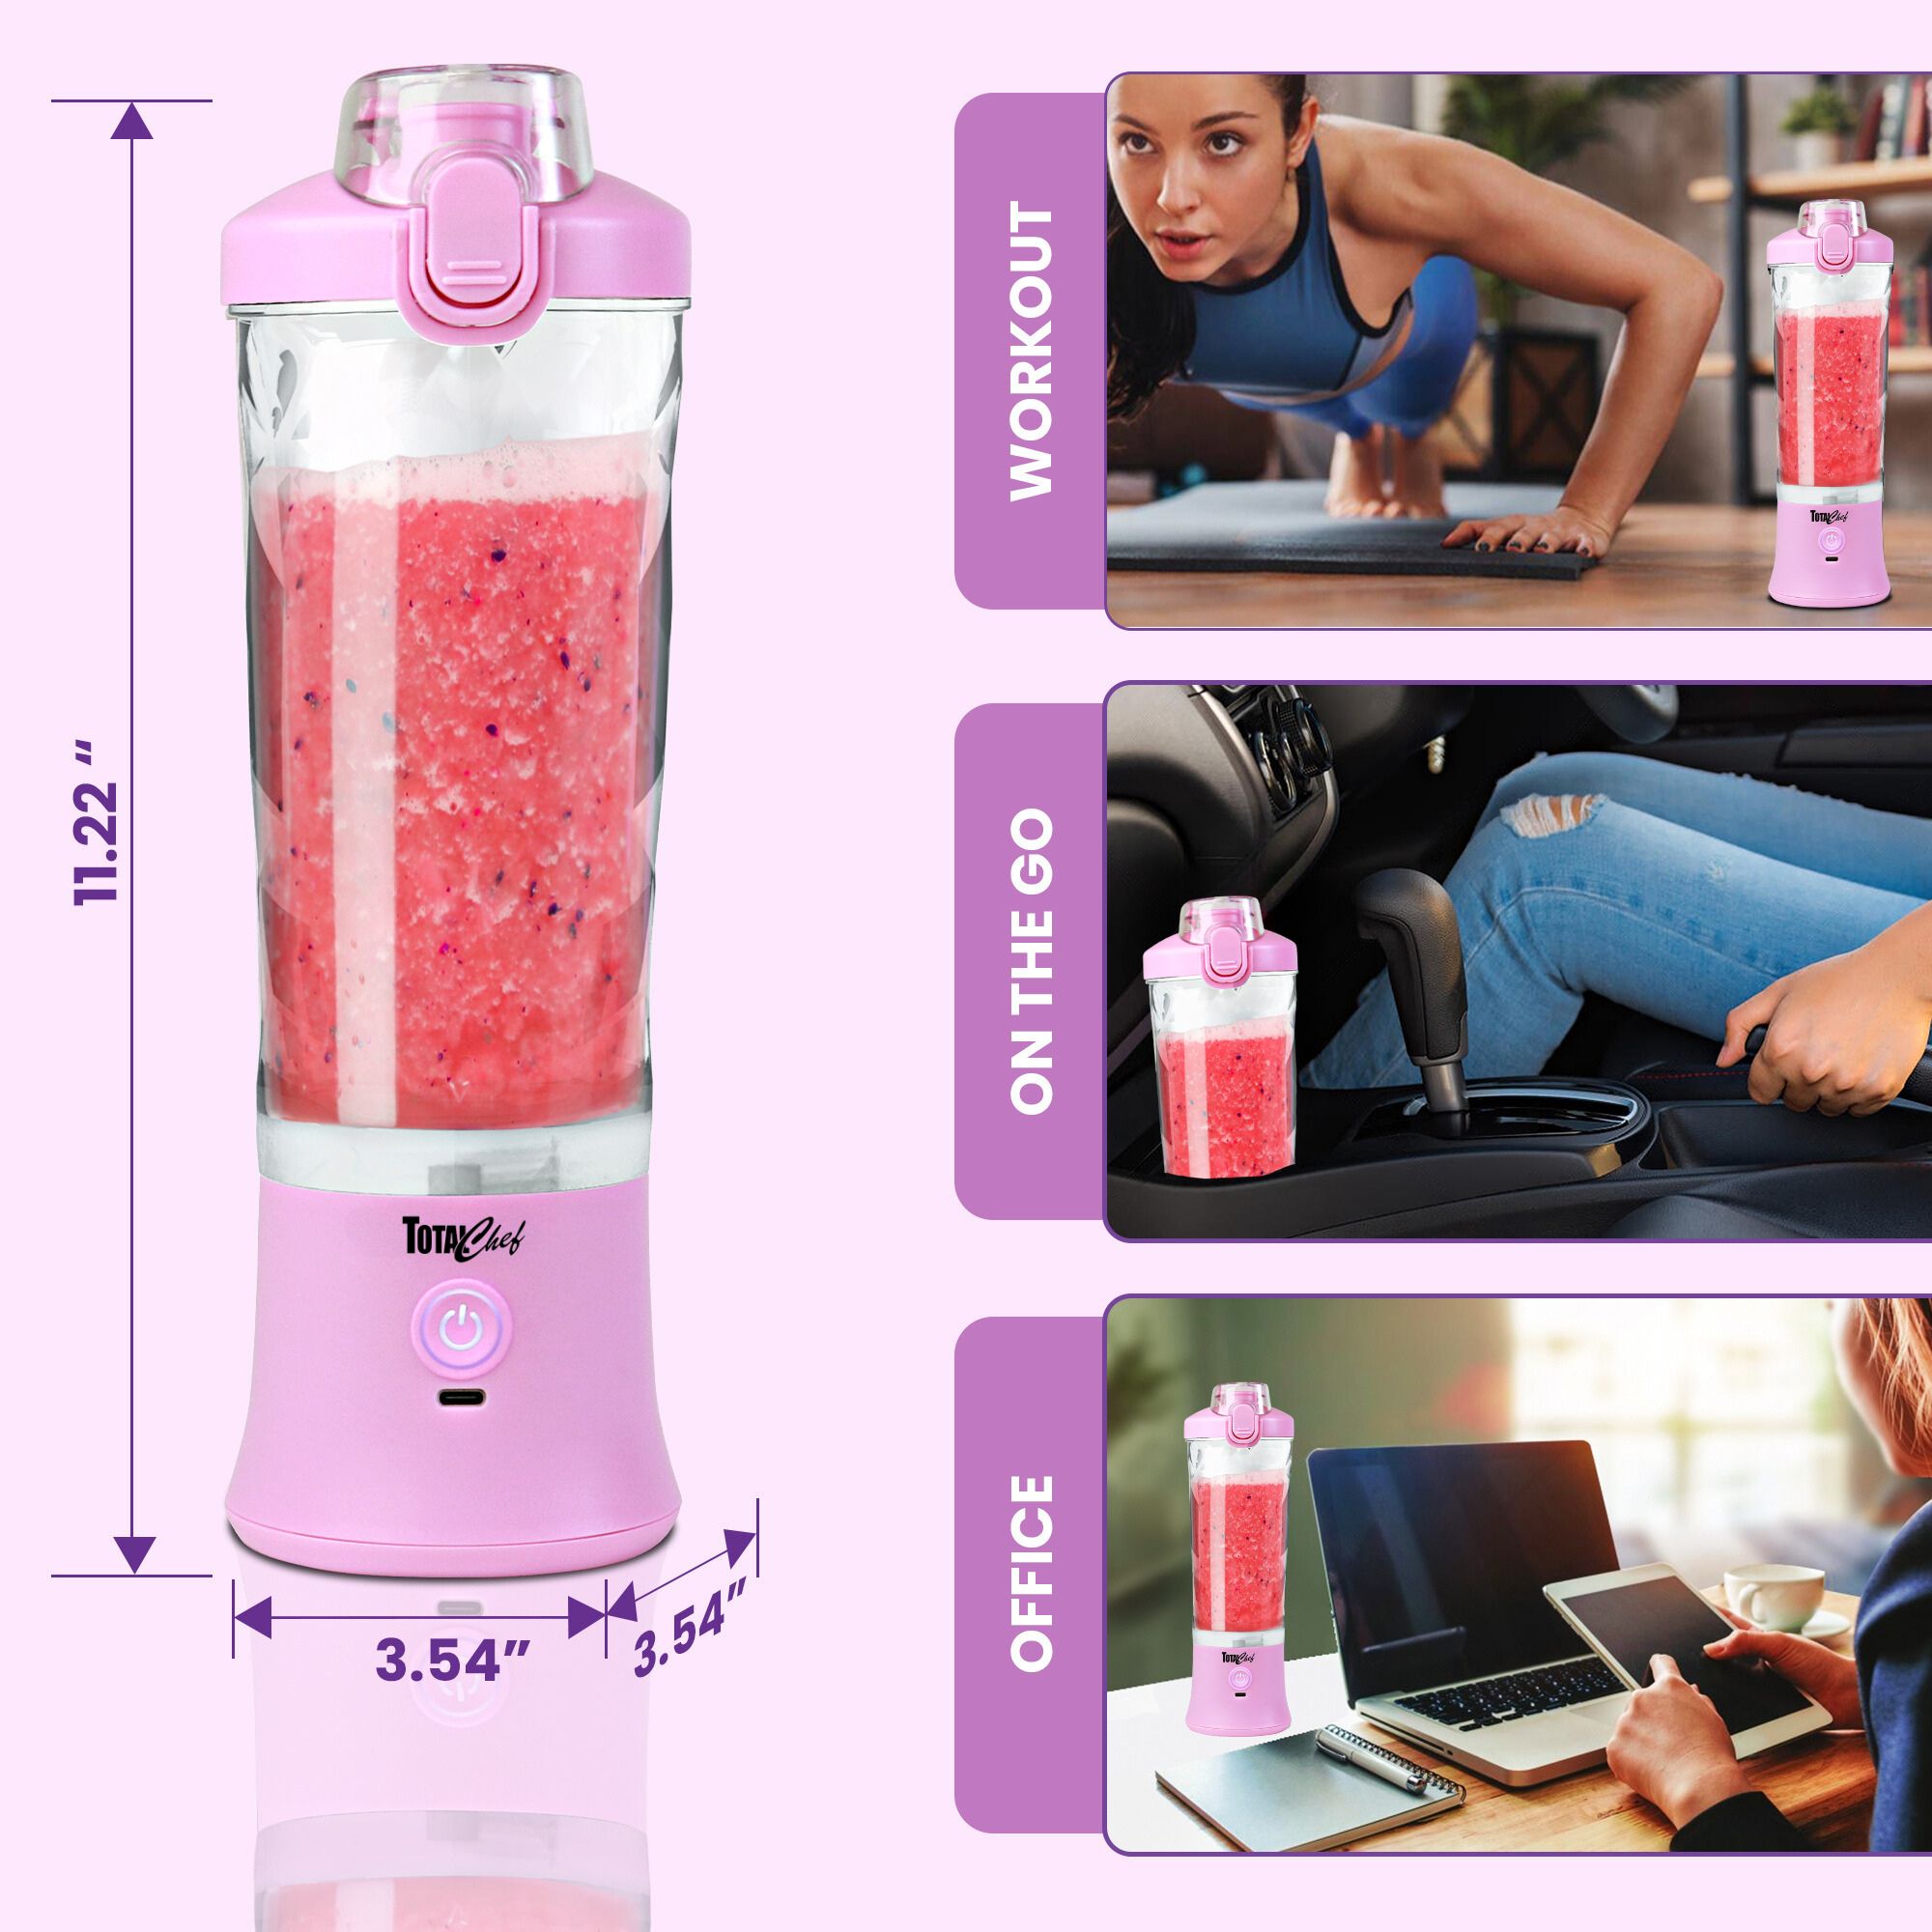 600ml Personal Blender for Shakes and Smoothies; Powerful & Professional  Smoothie Maker with Portable Bottle 300W Electric Motor BPA Frees Food  Processor 20 Oz 4 Stainless Steel Blade